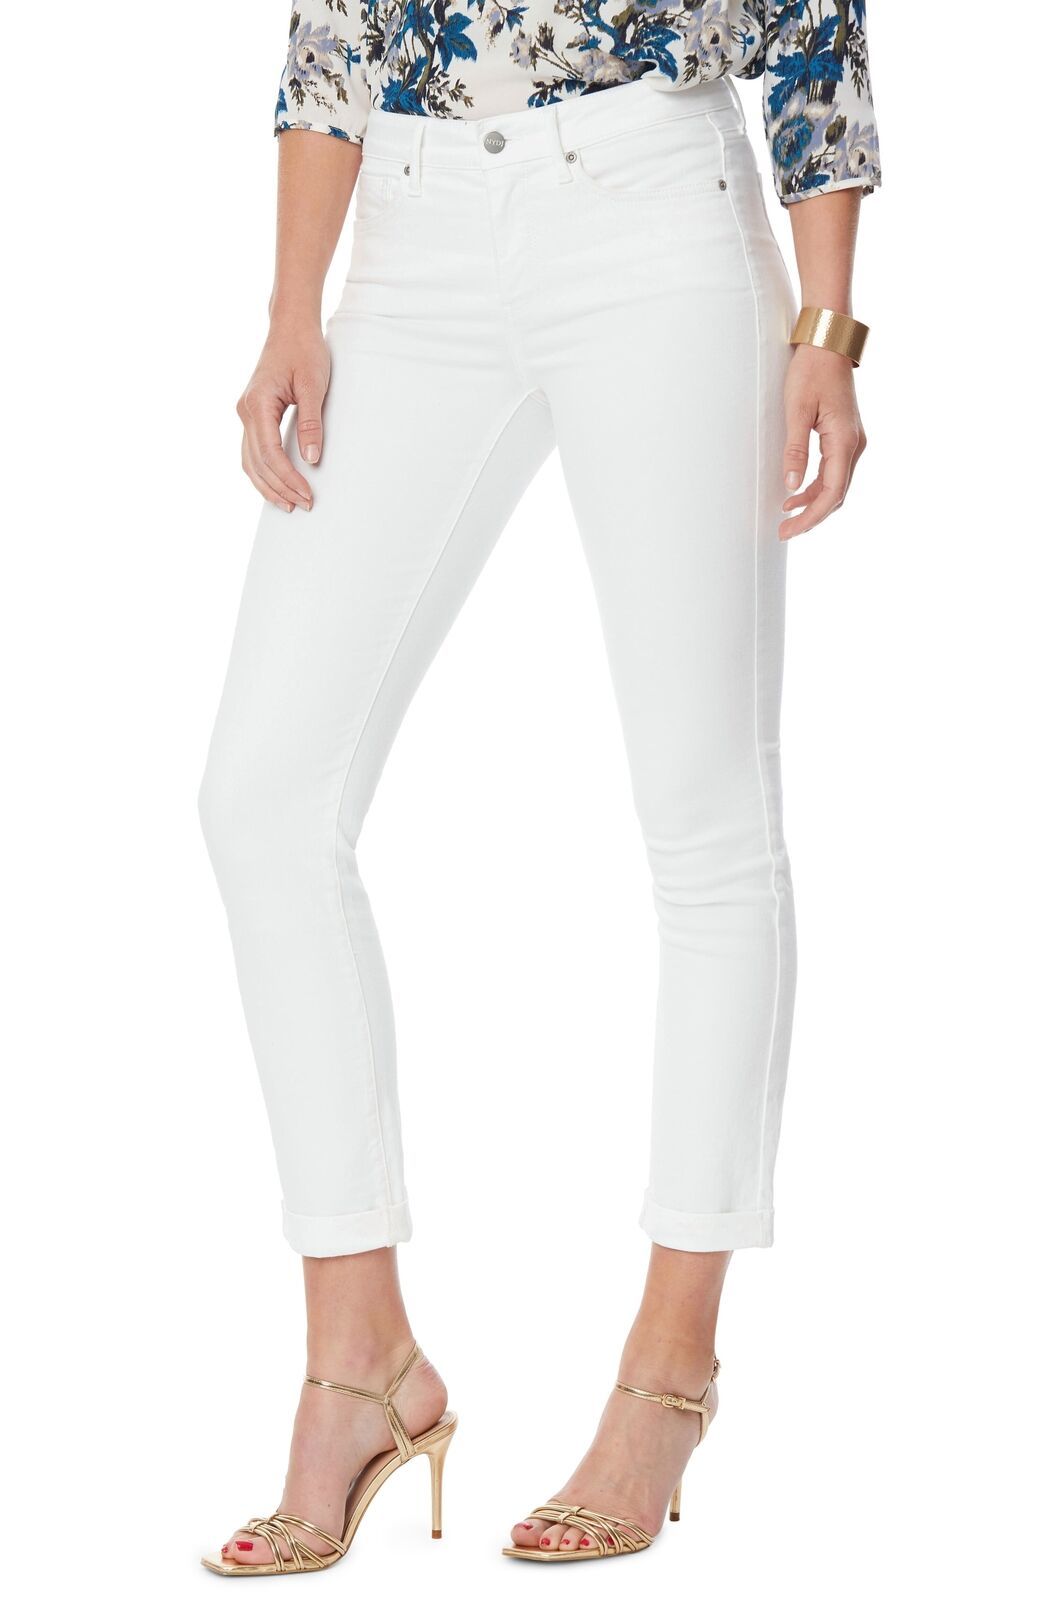 NYDJ OPTIC WHITE Women's Sheri Slim Ankle Jeans with Roll Cuff, US 12